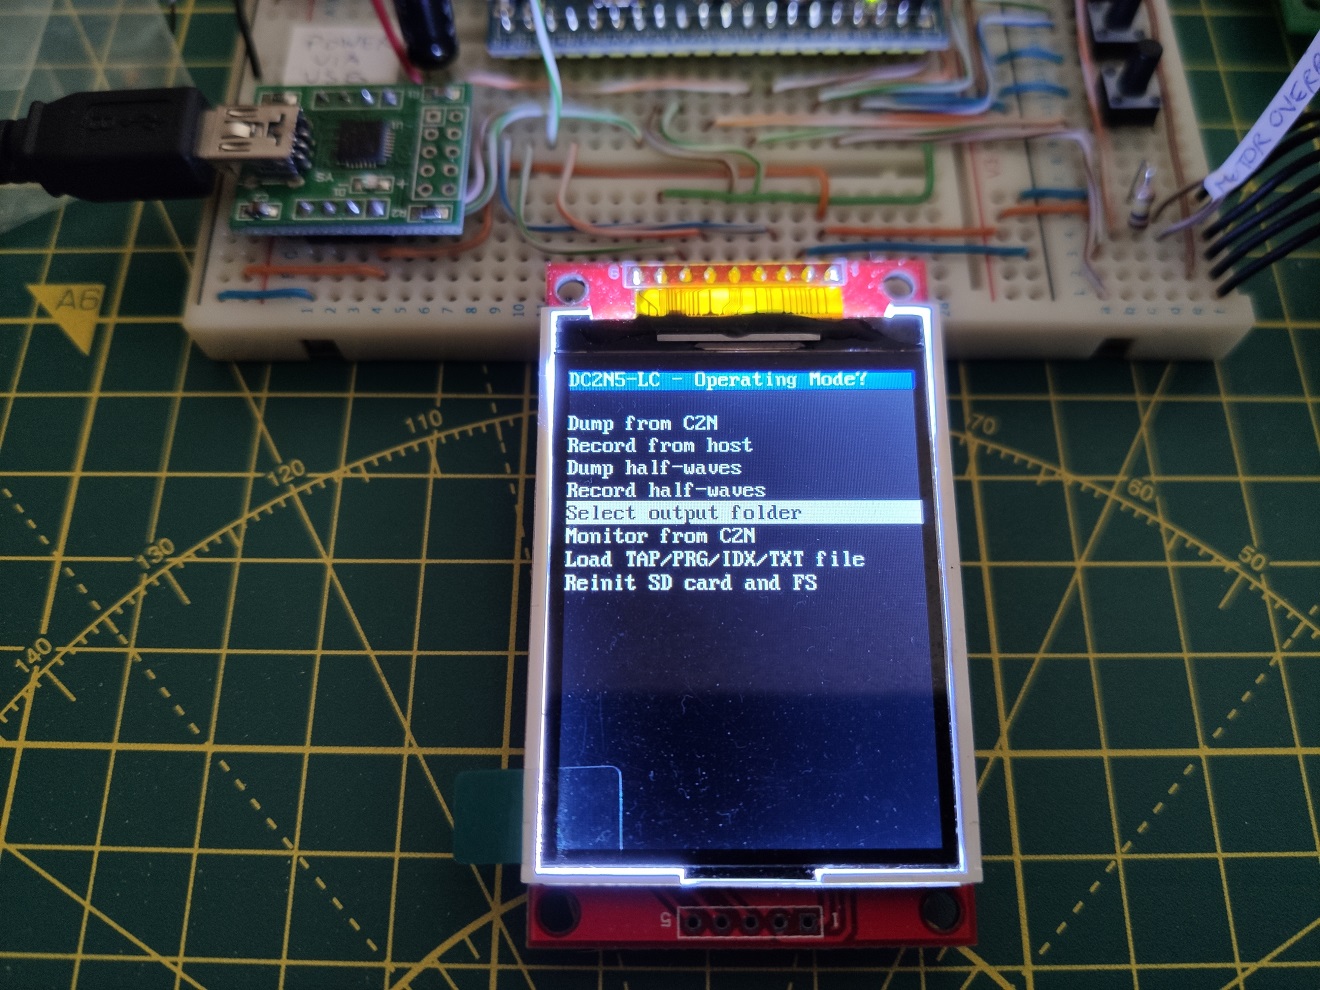 New option in the DC2N5-LC firmware by Luigi Di Fraia